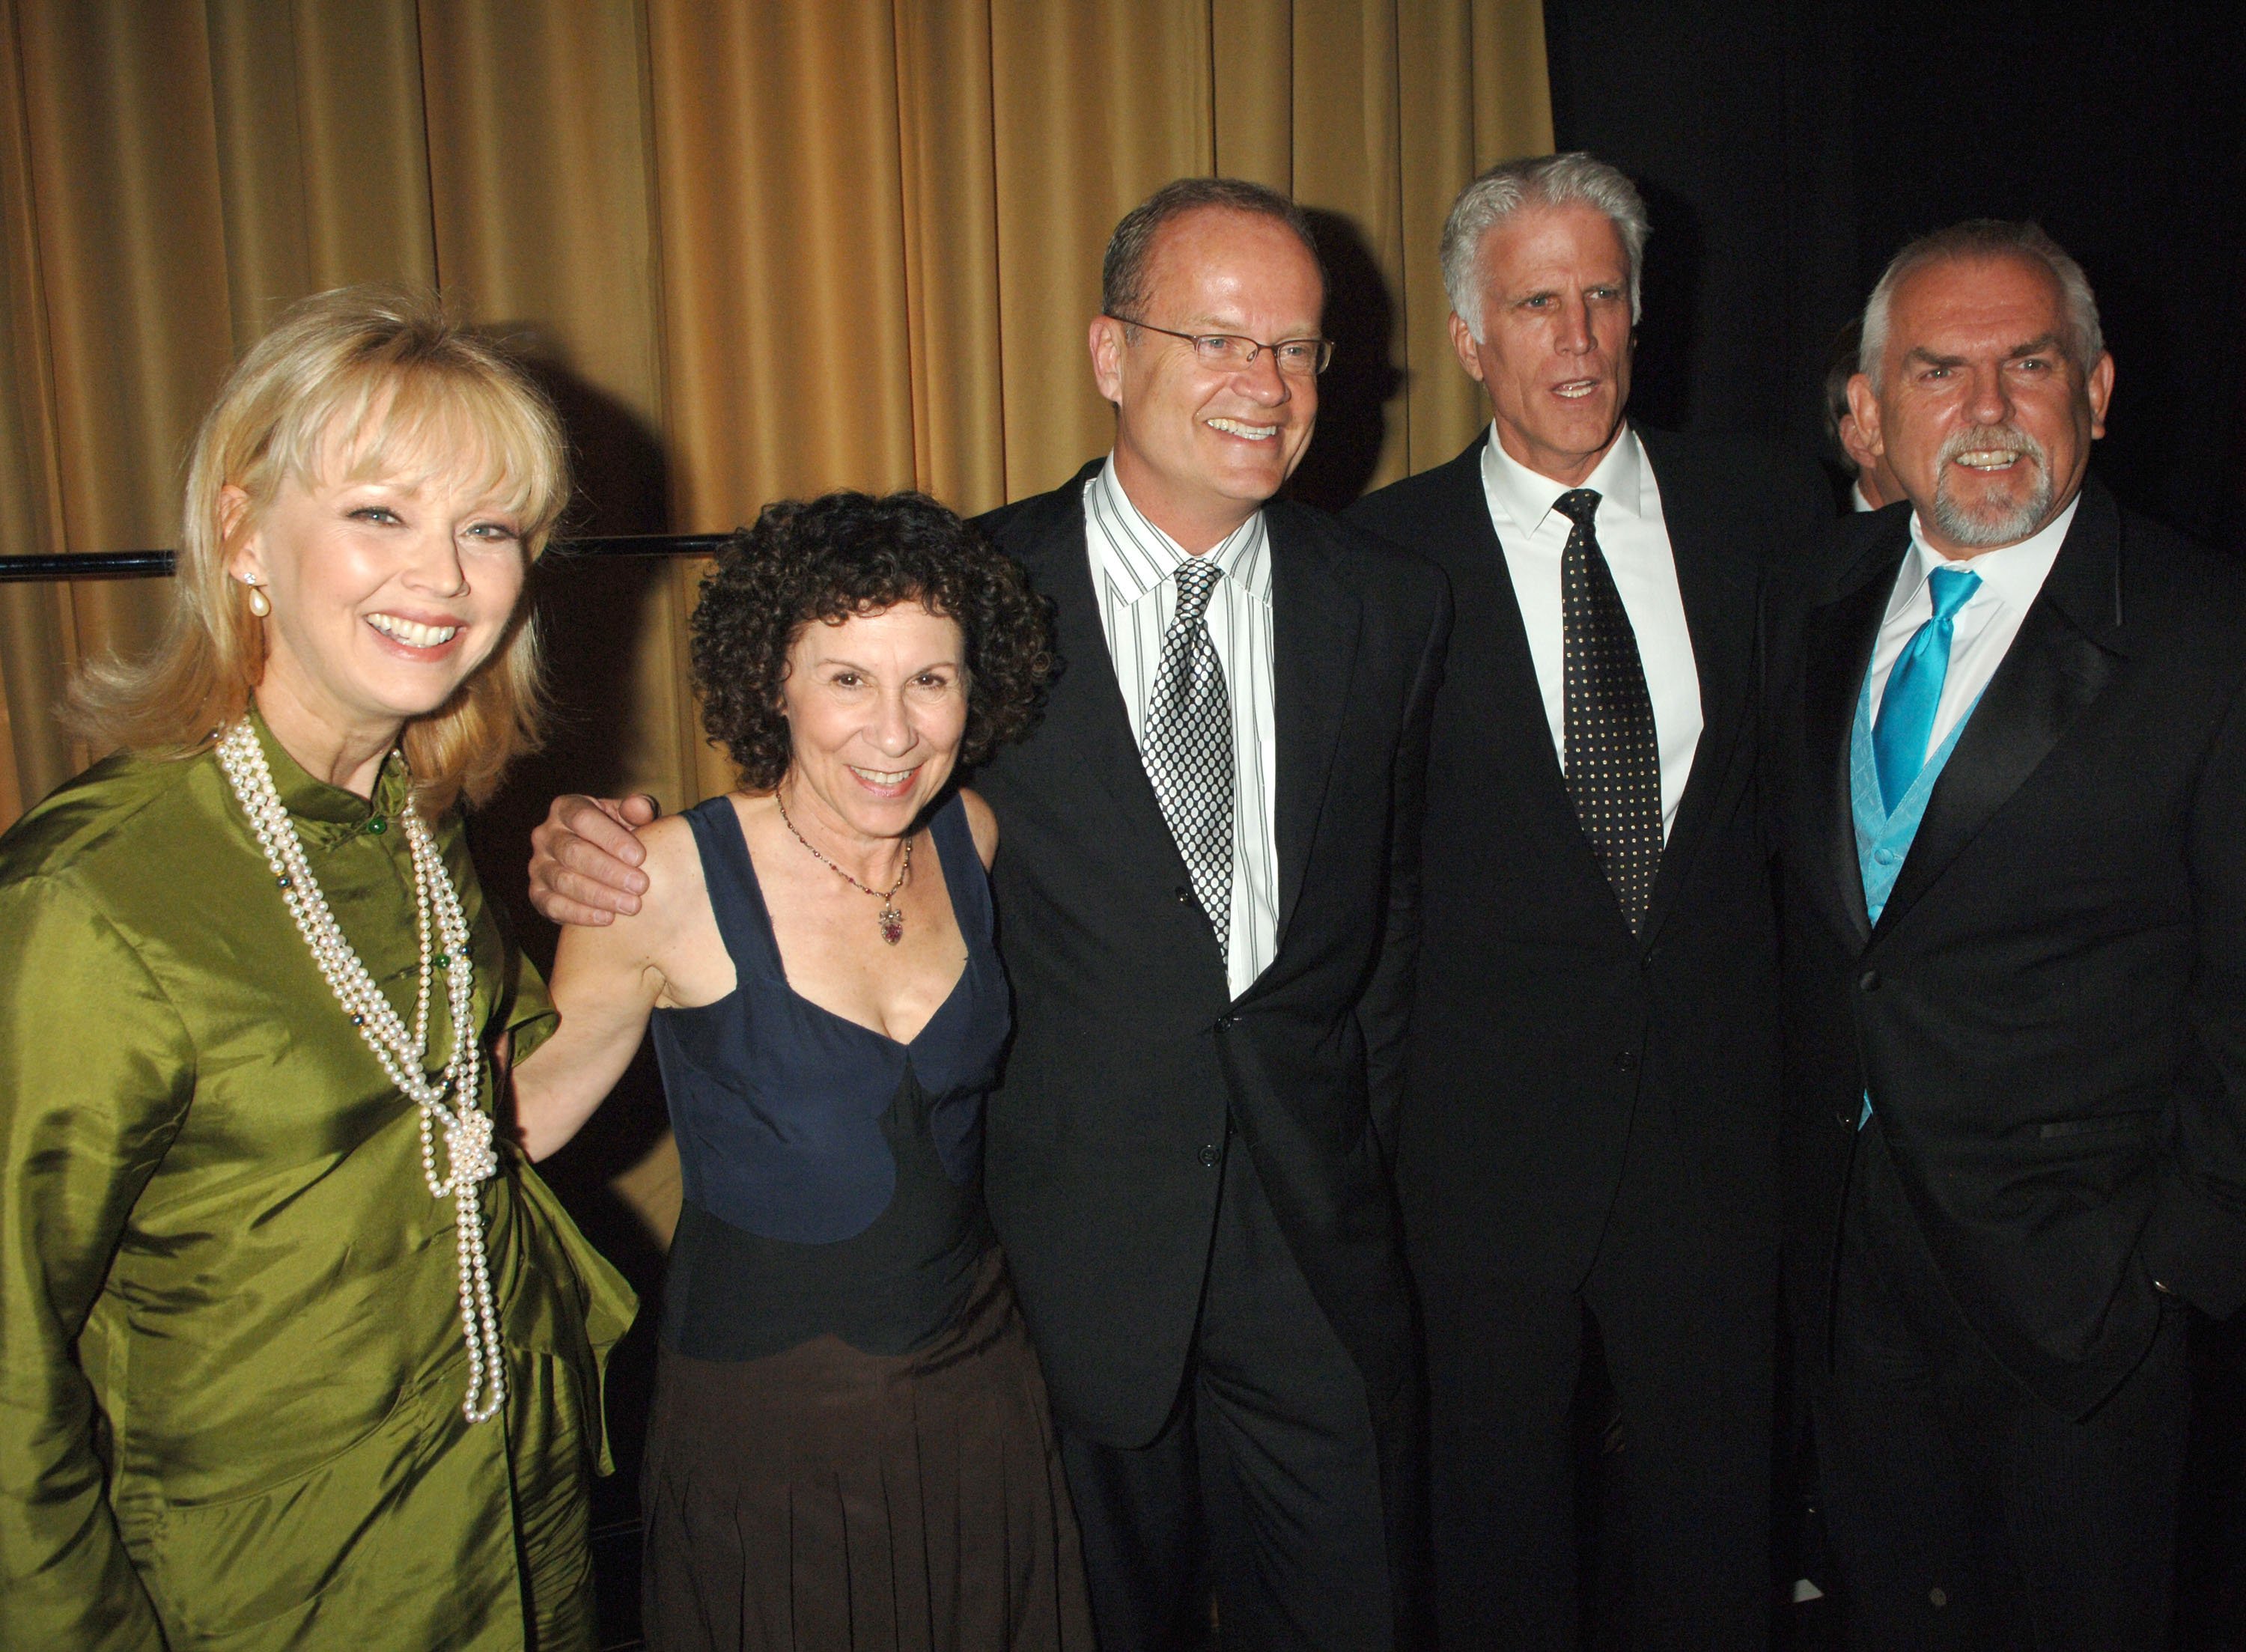 Shelley Long, Rhea Perlman, Kelsey Grammer, Ted Danson and John Ratzenberge at the TV Land Awards in 2006